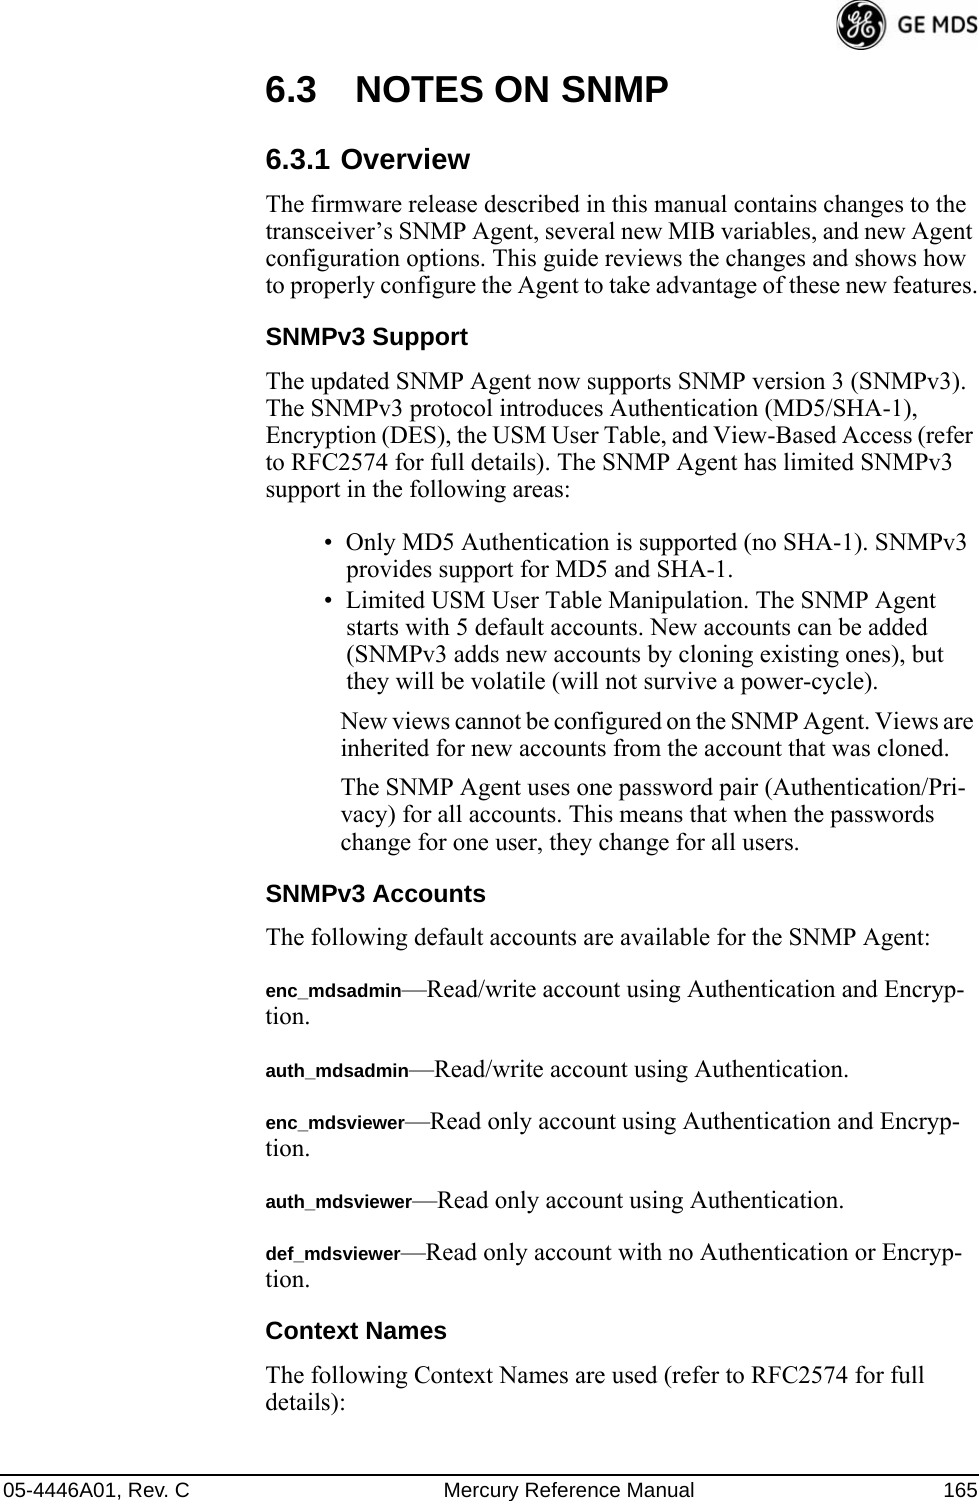 05-4446A01, Rev. C Mercury Reference Manual 1656.3 NOTES ON SNMP6.3.1 OverviewThe firmware release described in this manual contains changes to the transceiver’s SNMP Agent, several new MIB variables, and new Agent configuration options. This guide reviews the changes and shows how to properly configure the Agent to take advantage of these new features.SNMPv3 SupportThe updated SNMP Agent now supports SNMP version 3 (SNMPv3). The SNMPv3 protocol introduces Authentication (MD5/SHA-1), Encryption (DES), the USM User Table, and View-Based Access (refer to RFC2574 for full details). The SNMP Agent has limited SNMPv3 support in the following areas:• Only MD5 Authentication is supported (no SHA-1). SNMPv3 provides support for MD5 and SHA-1.• Limited USM User Table Manipulation. The SNMP Agent starts with 5 default accounts. New accounts can be added (SNMPv3 adds new accounts by cloning existing ones), but they will be volatile (will not survive a power-cycle). New views cannot be configured on the SNMP Agent. Views are inherited for new accounts from the account that was cloned.The SNMP Agent uses one password pair (Authentication/Pri-vacy) for all accounts. This means that when the passwords change for one user, they change for all users.SNMPv3 AccountsThe following default accounts are available for the SNMP Agent:enc_mdsadmin—Read/write account using Authentication and Encryp-tion.auth_mdsadmin—Read/write account using Authentication.enc_mdsviewer—Read only account using Authentication and Encryp-tion.auth_mdsviewer—Read only account using Authentication.def_mdsviewer—Read only account with no Authentication or Encryp-tion.Context NamesThe following Context Names are used (refer to RFC2574 for full details):